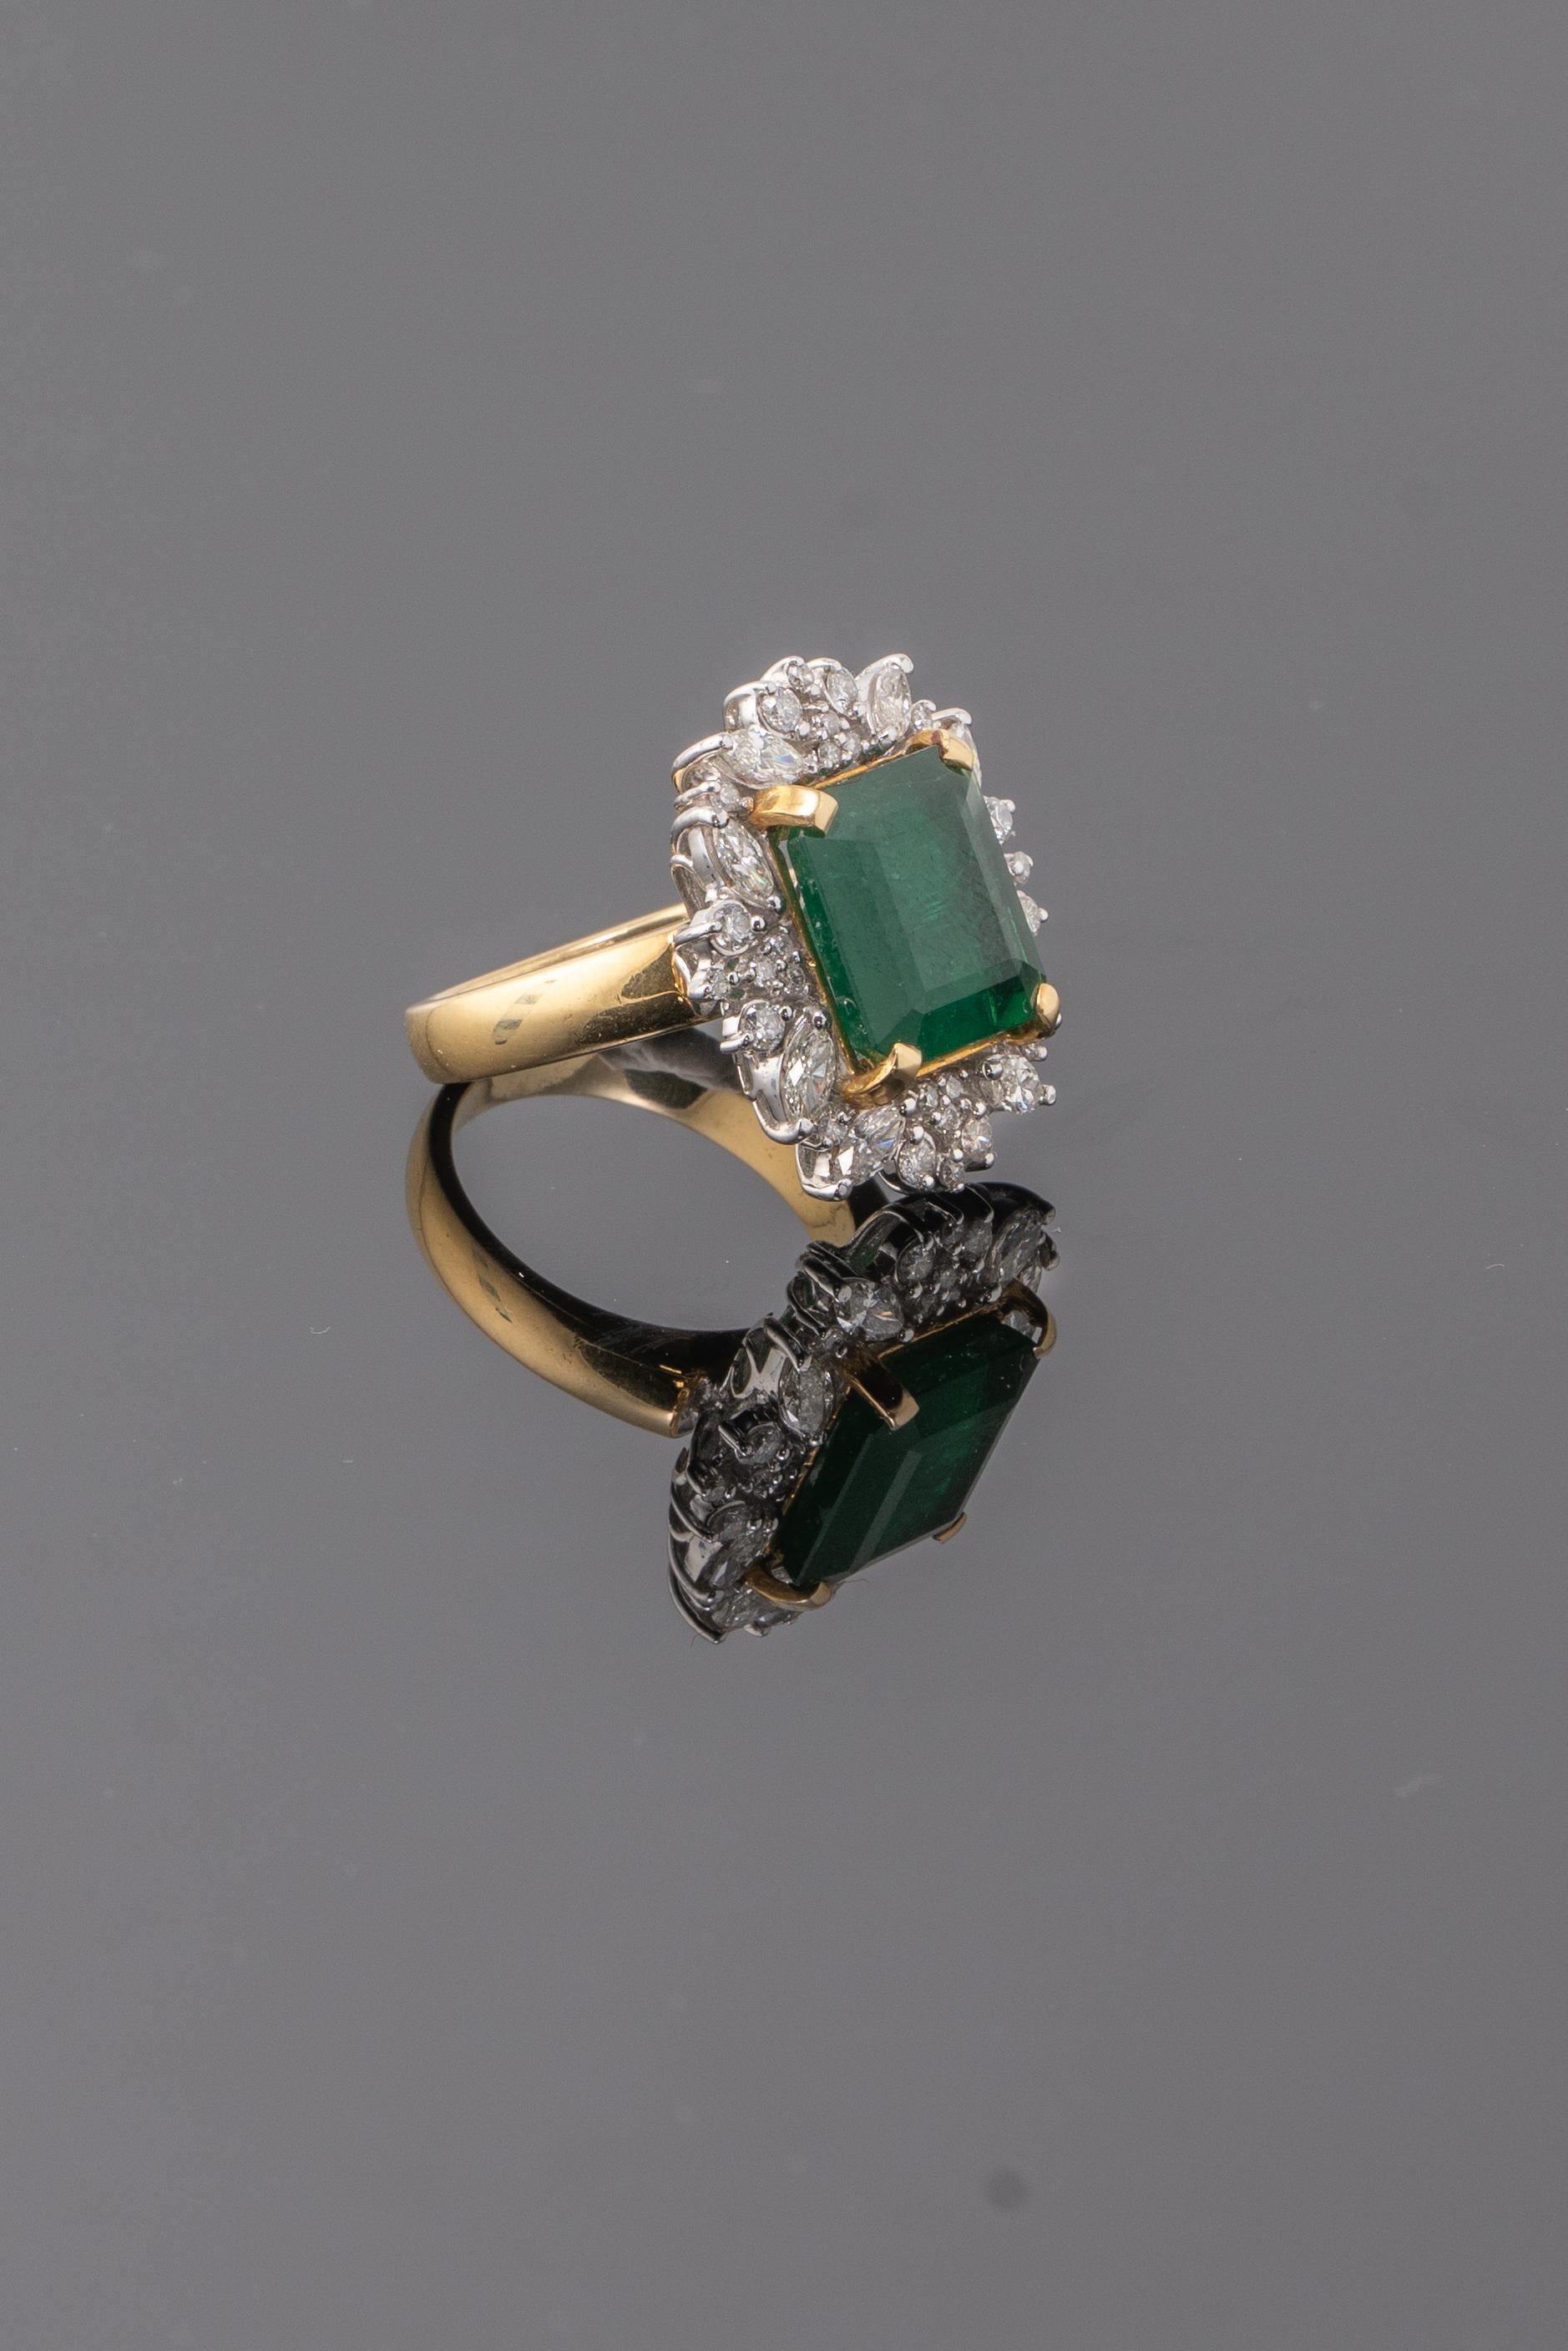 A stunning 6.57 carat Zambian Emerald and Diamond cocktail ring, set in 18K Yellow Gold and White Gold (Diamond part). The ring is currently sized at US 6.5, can be resized. 
Please feel free to message us if you have any queries. 
Free shipping